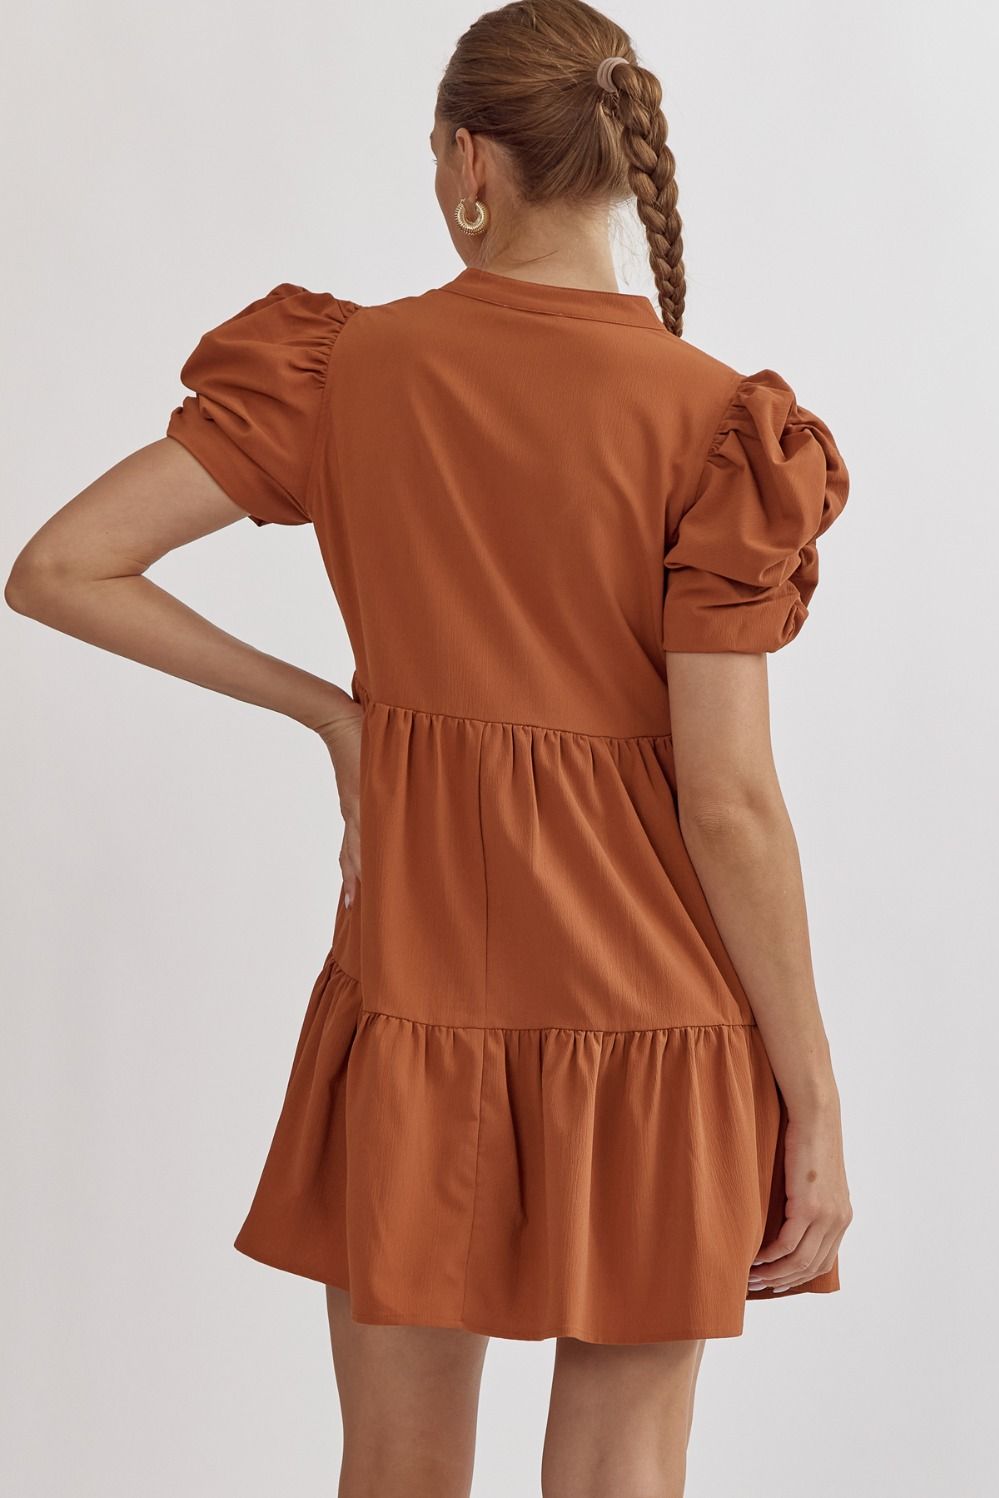 Woven Ruched Puff Sleeve V-Neck Dress-Cognac